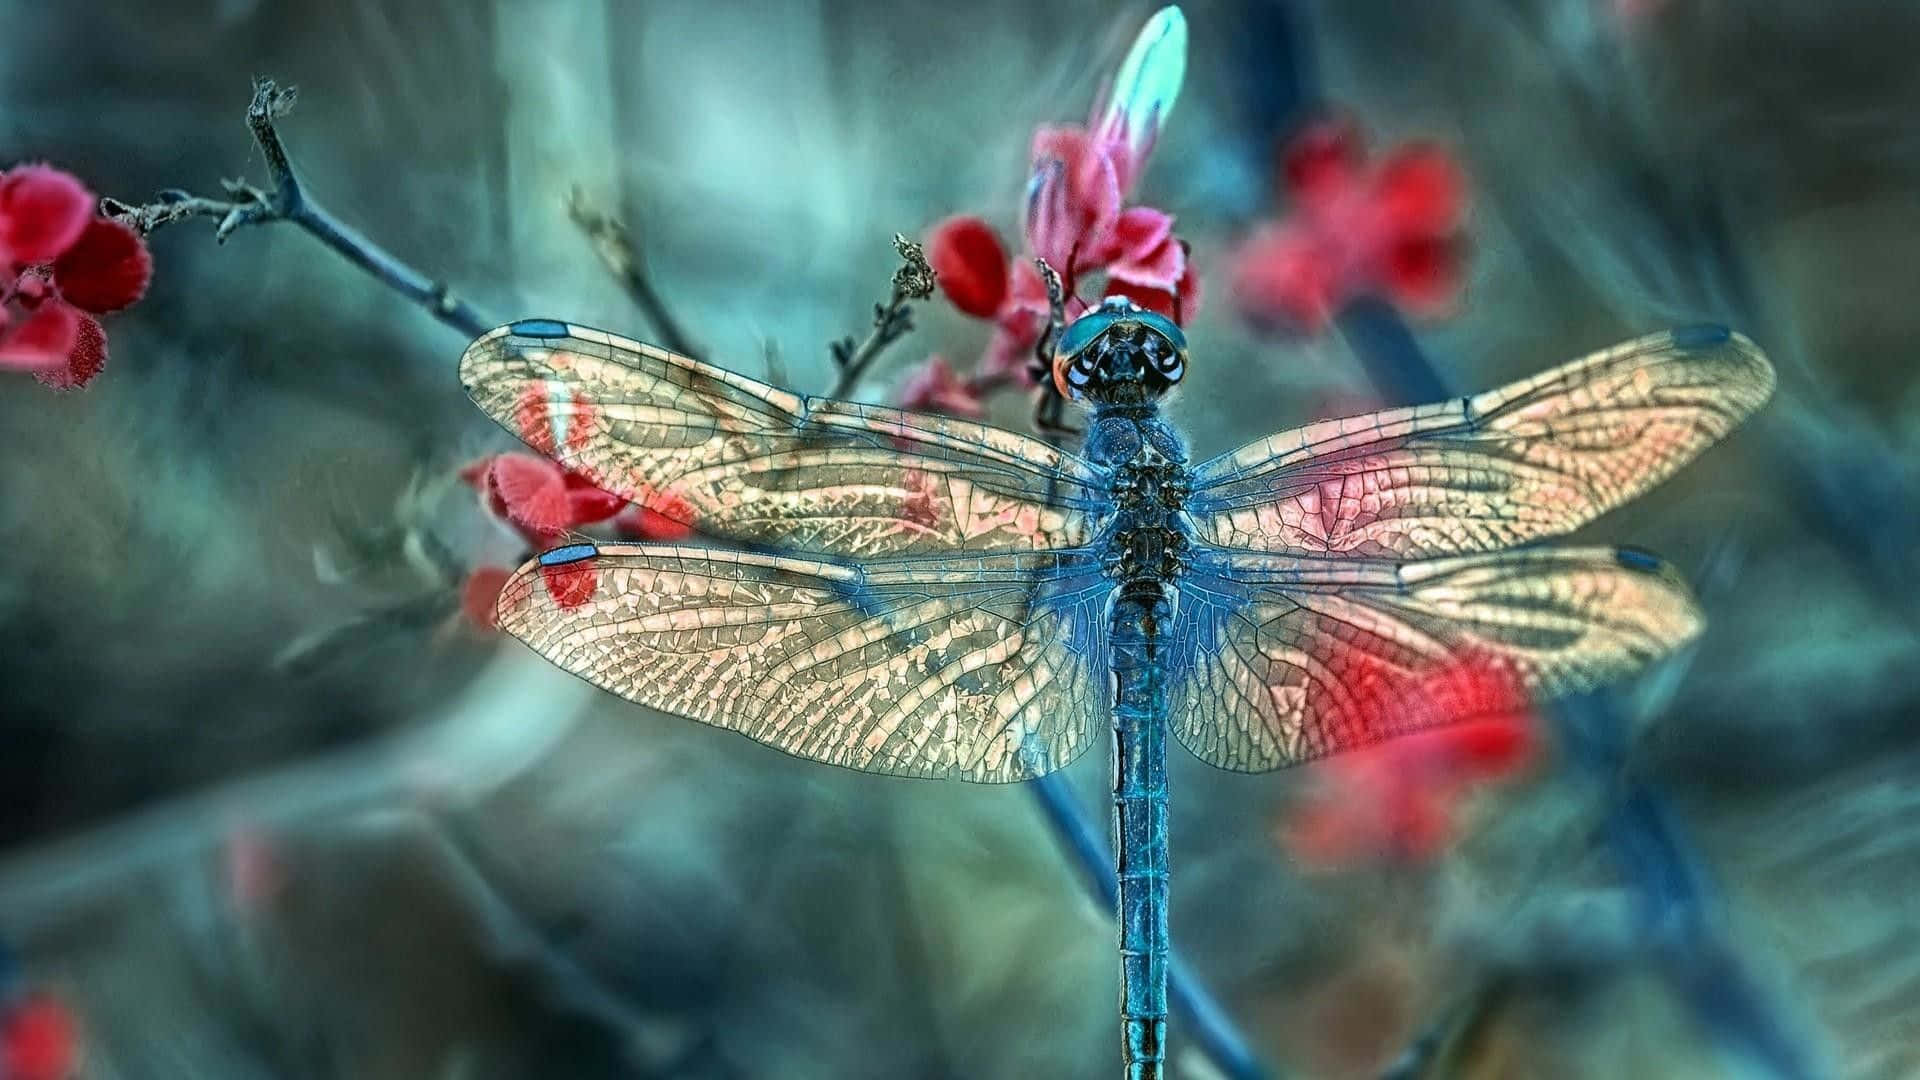 "A beautiful dragonfly on a vibrant flower"